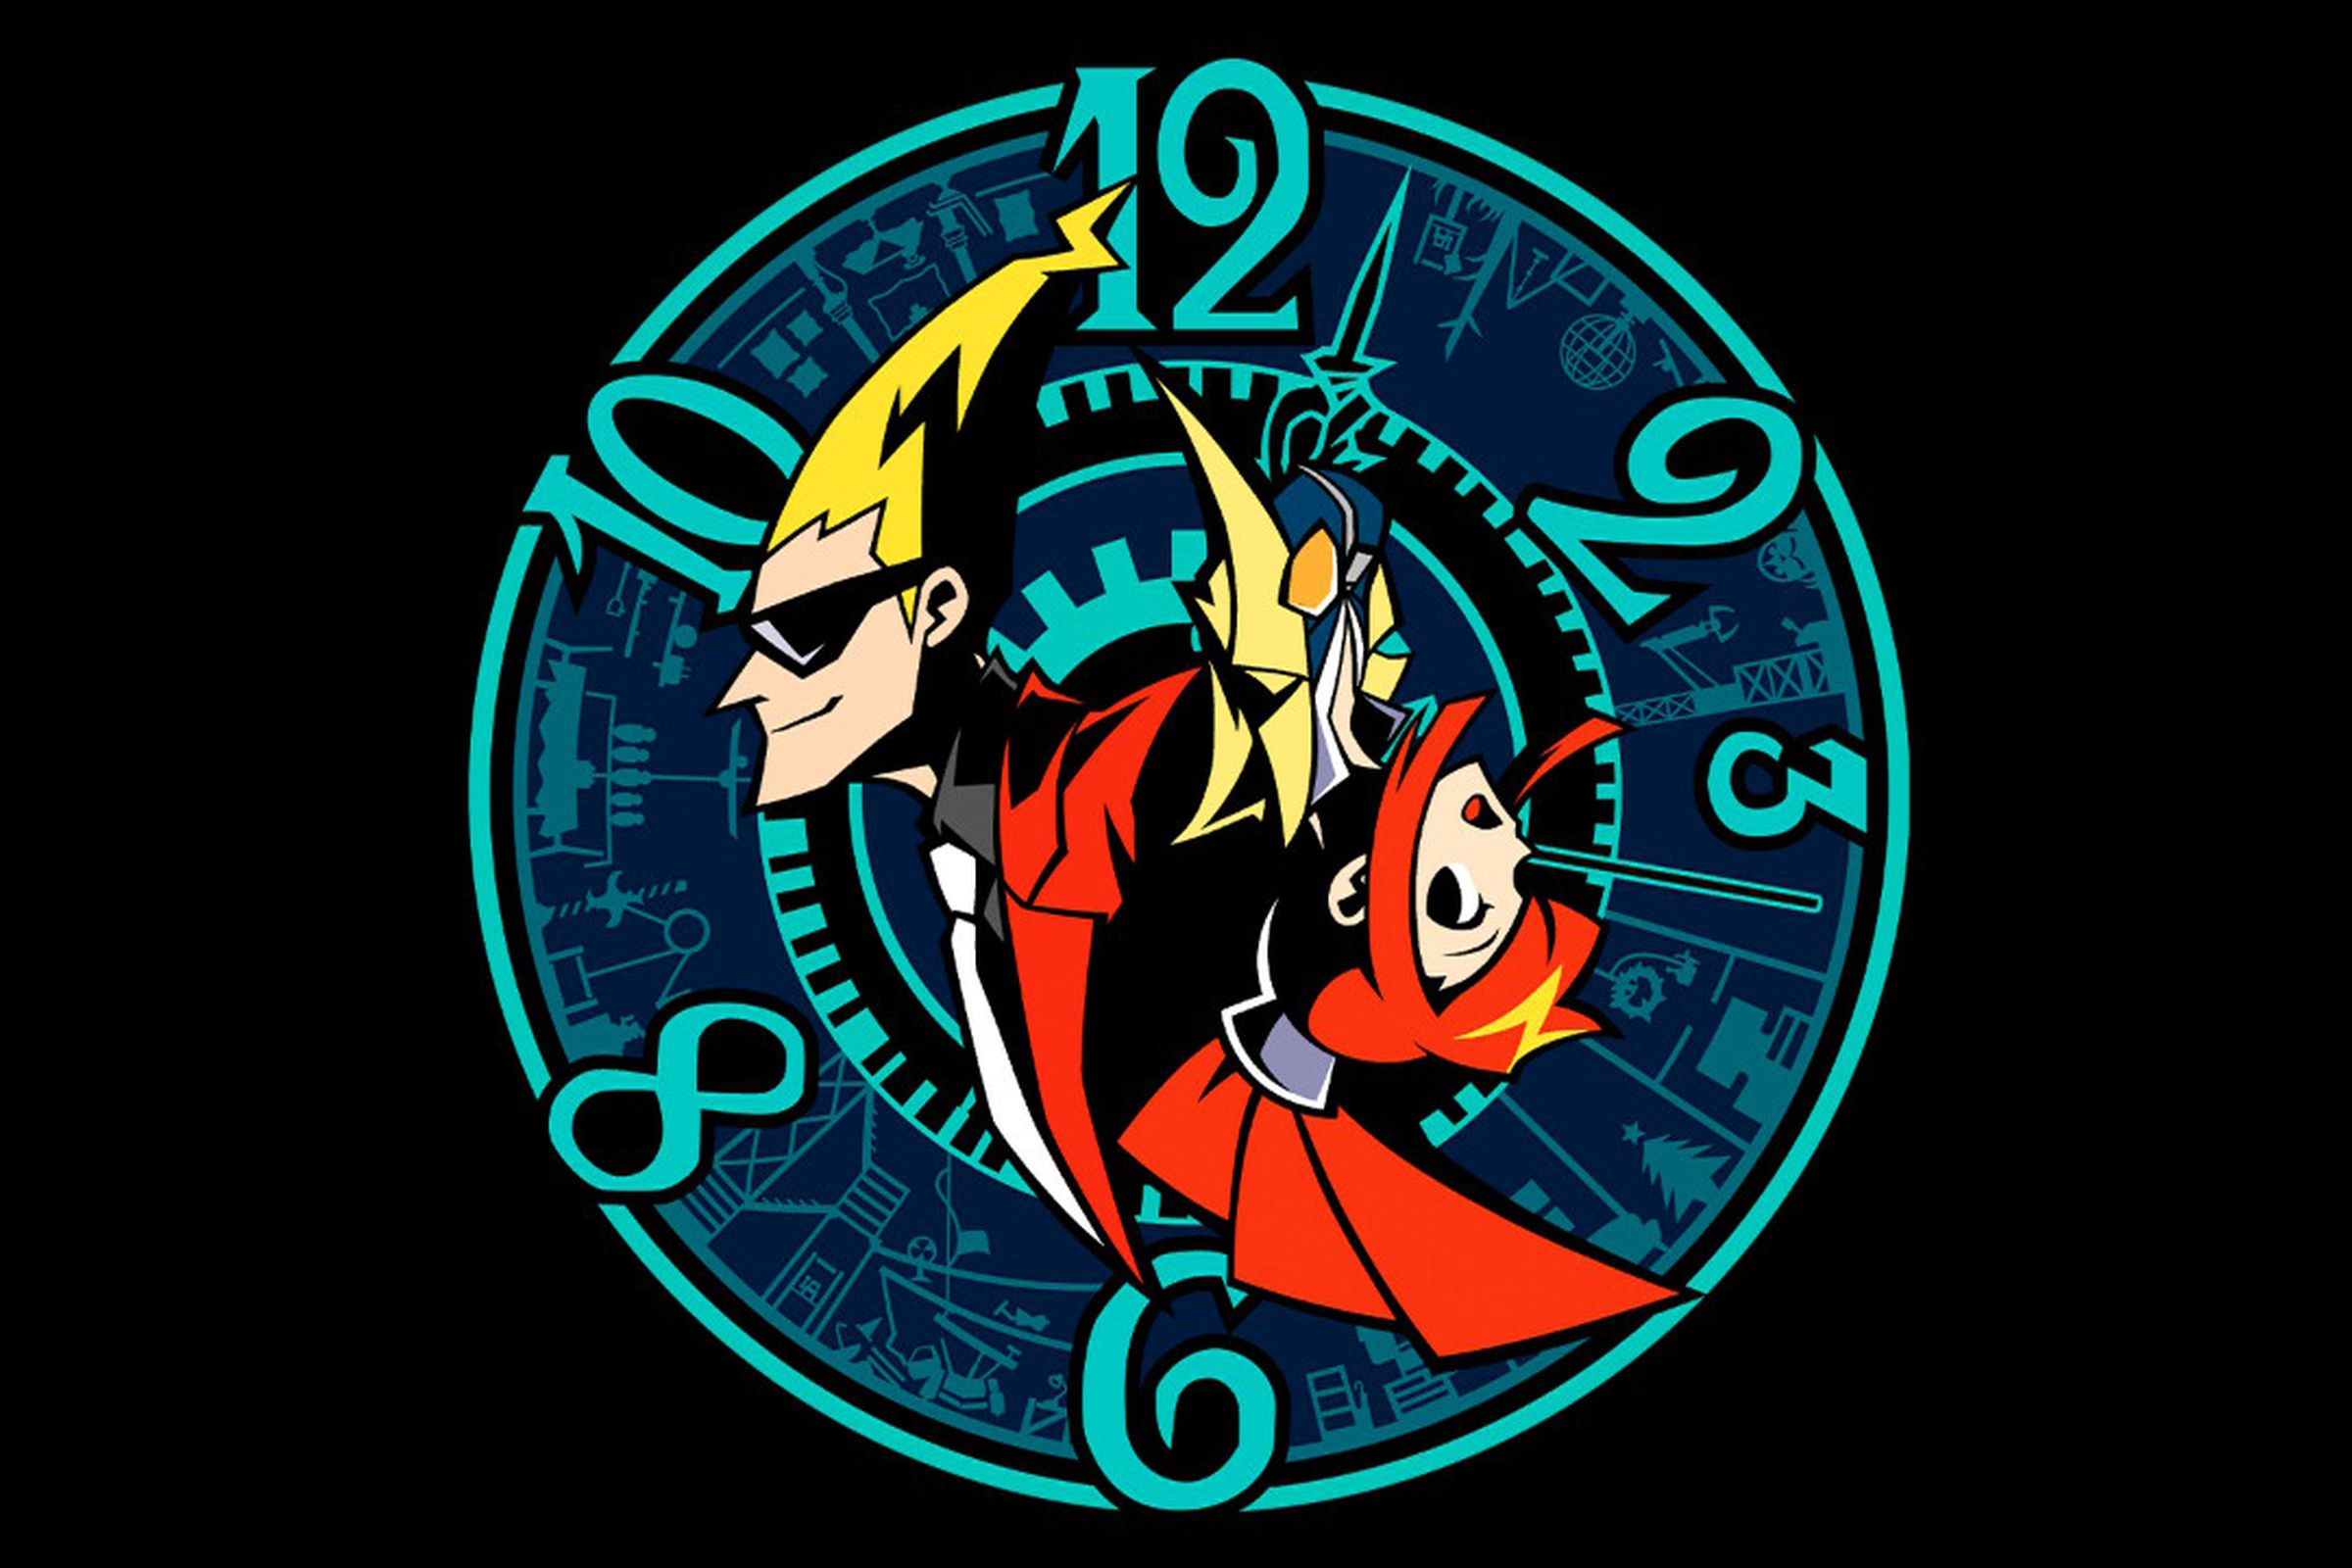 Key art from Ghost Trick: Phantom Detective featuring a graphic that includes the game’s two main characters: a male with very tall blonde hair, red suit and sunglasses, and a woman with bright red hair